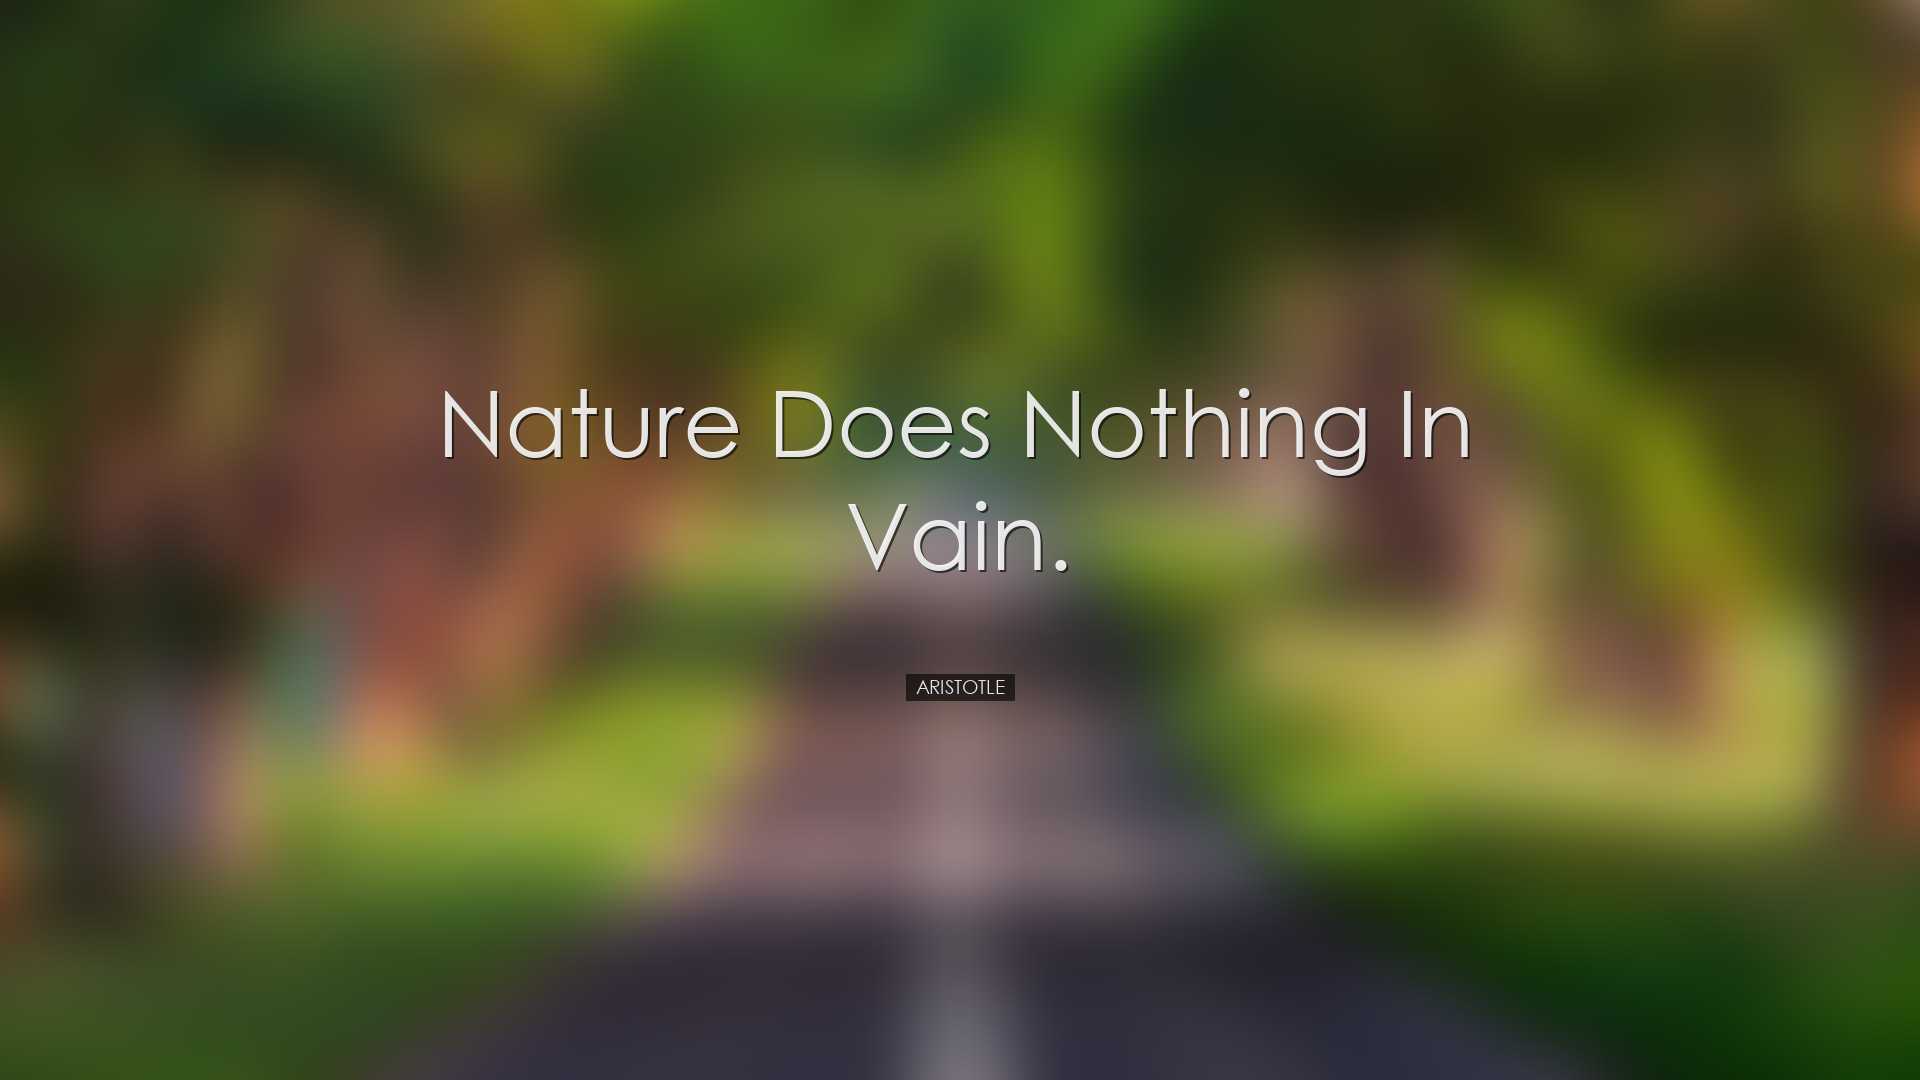 Nature does nothing in vain. - Aristotle